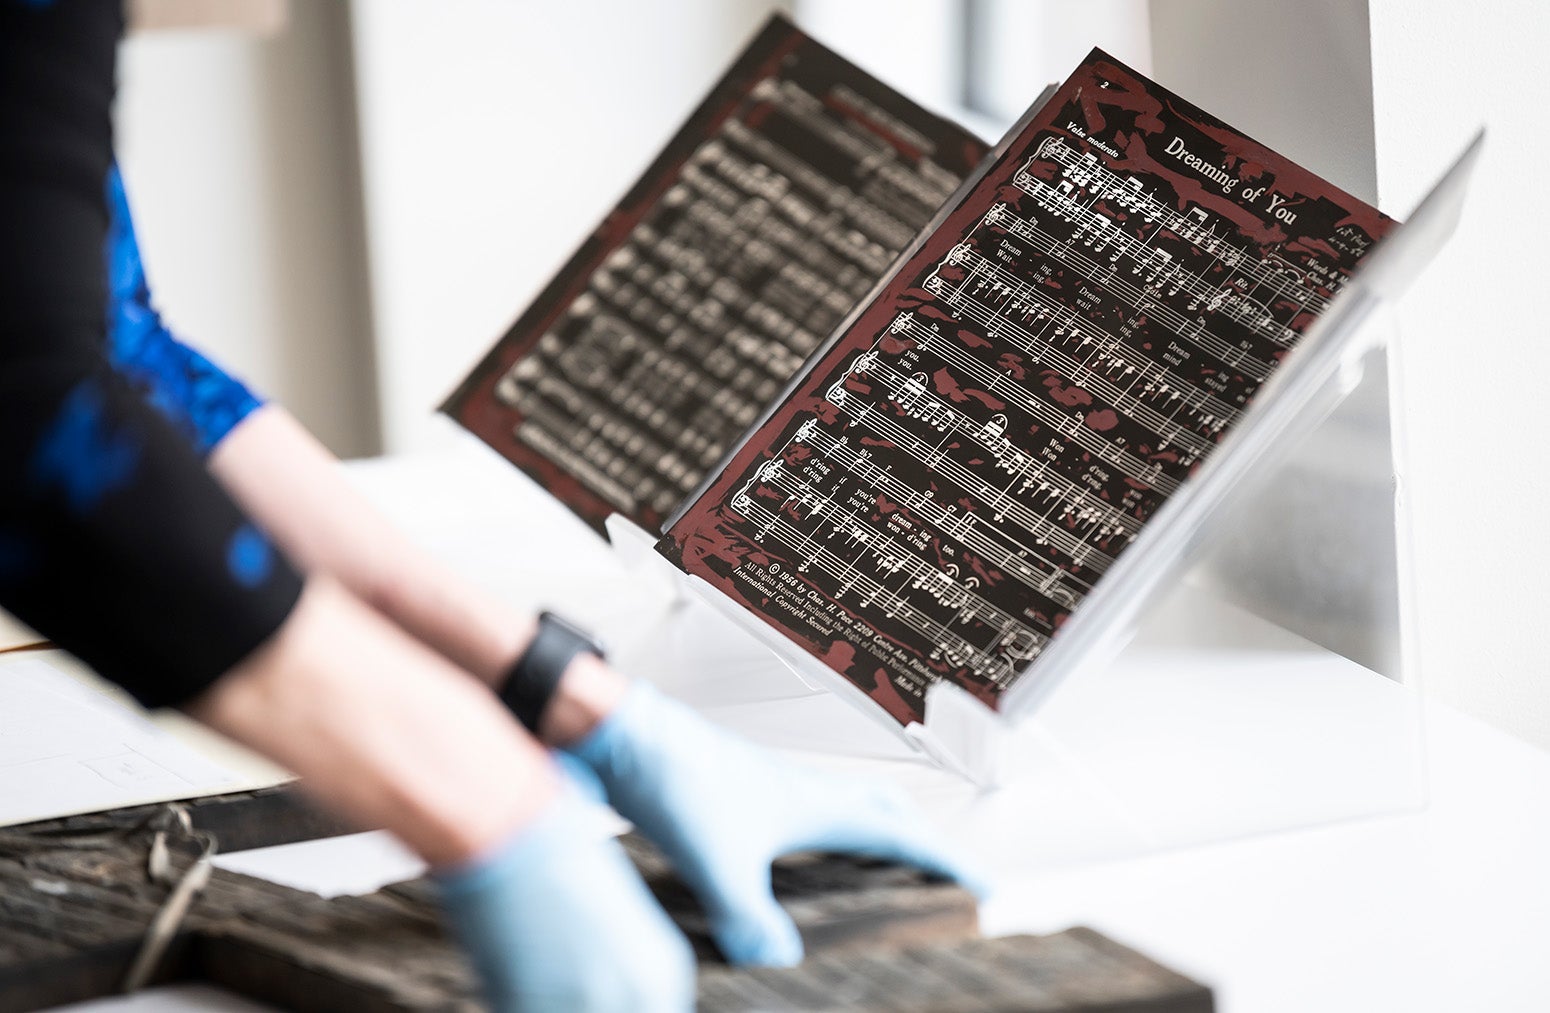 Gloves hands handle printing blocks for sheet music, which is displayed on a stand